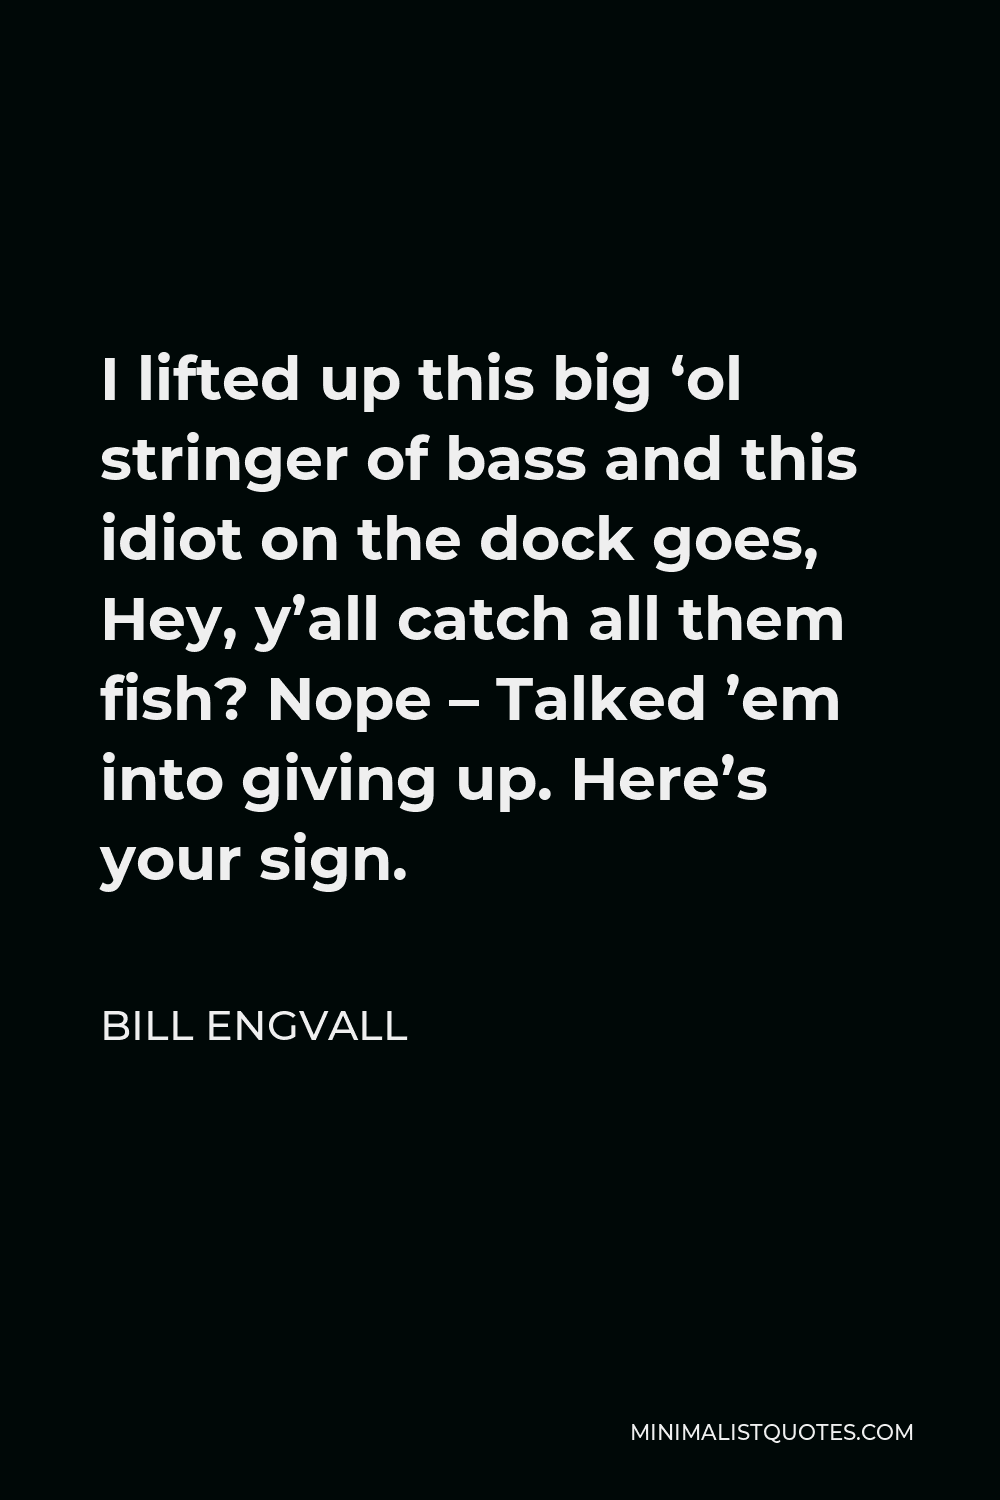 Bill Engvall Quote - I lifted up this big ‘ol stringer of bass and this idiot on the dock goes, Hey, y’all catch all them fish? Nope – Talked ’em into giving up. Here’s your sign.